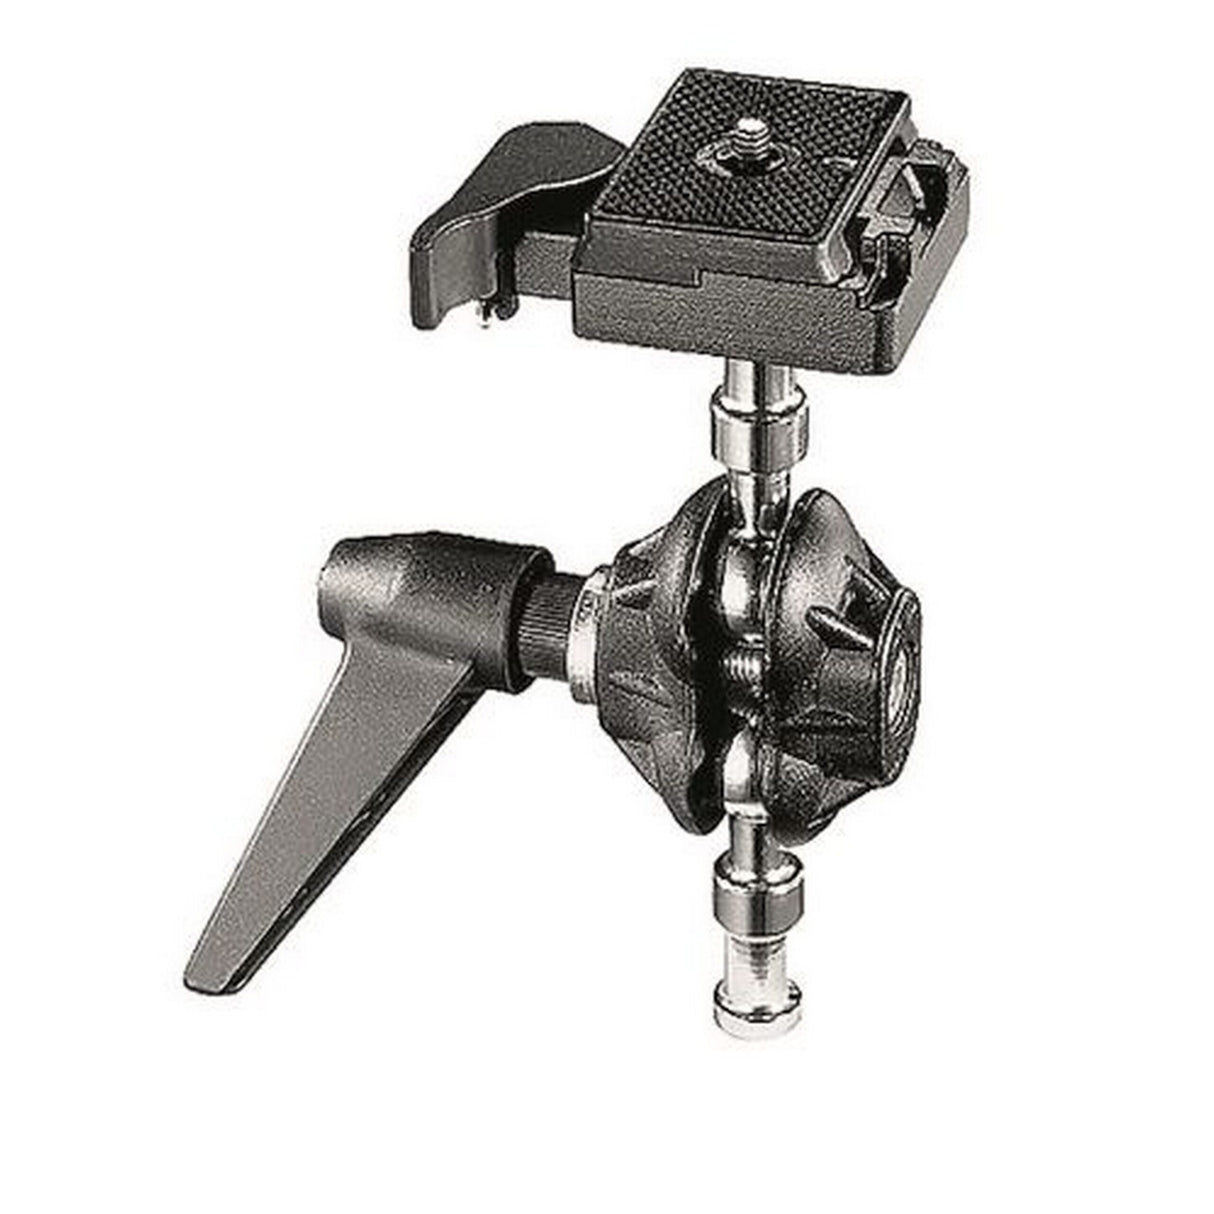 Manfrotto 155RC Tilt-Top Head with Quick Plate